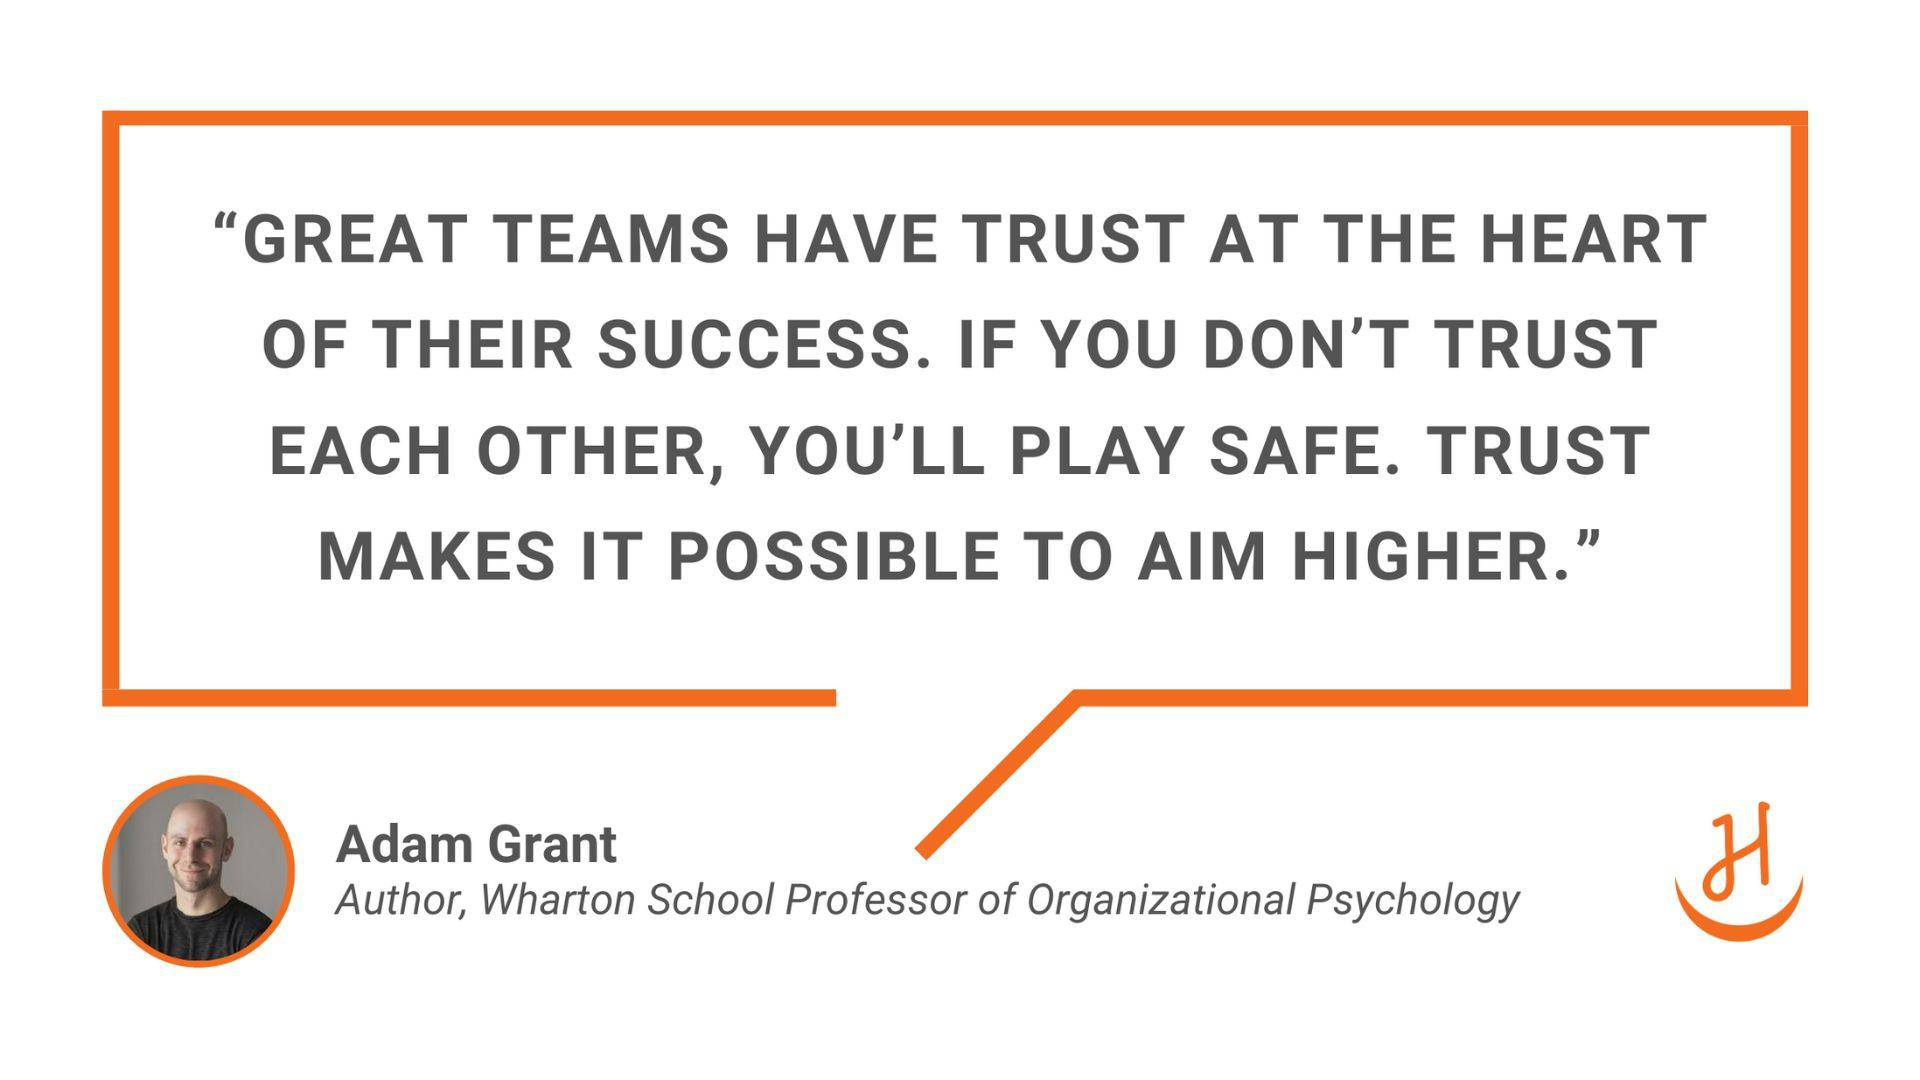 "Great teams have trust at the heart of their success. If you don’t trust each other, you’ll play safe. Trust makes it possible to aim higher." Quote by Adam Grant​, Author and Wharton School Professor or Organizational Psychology.